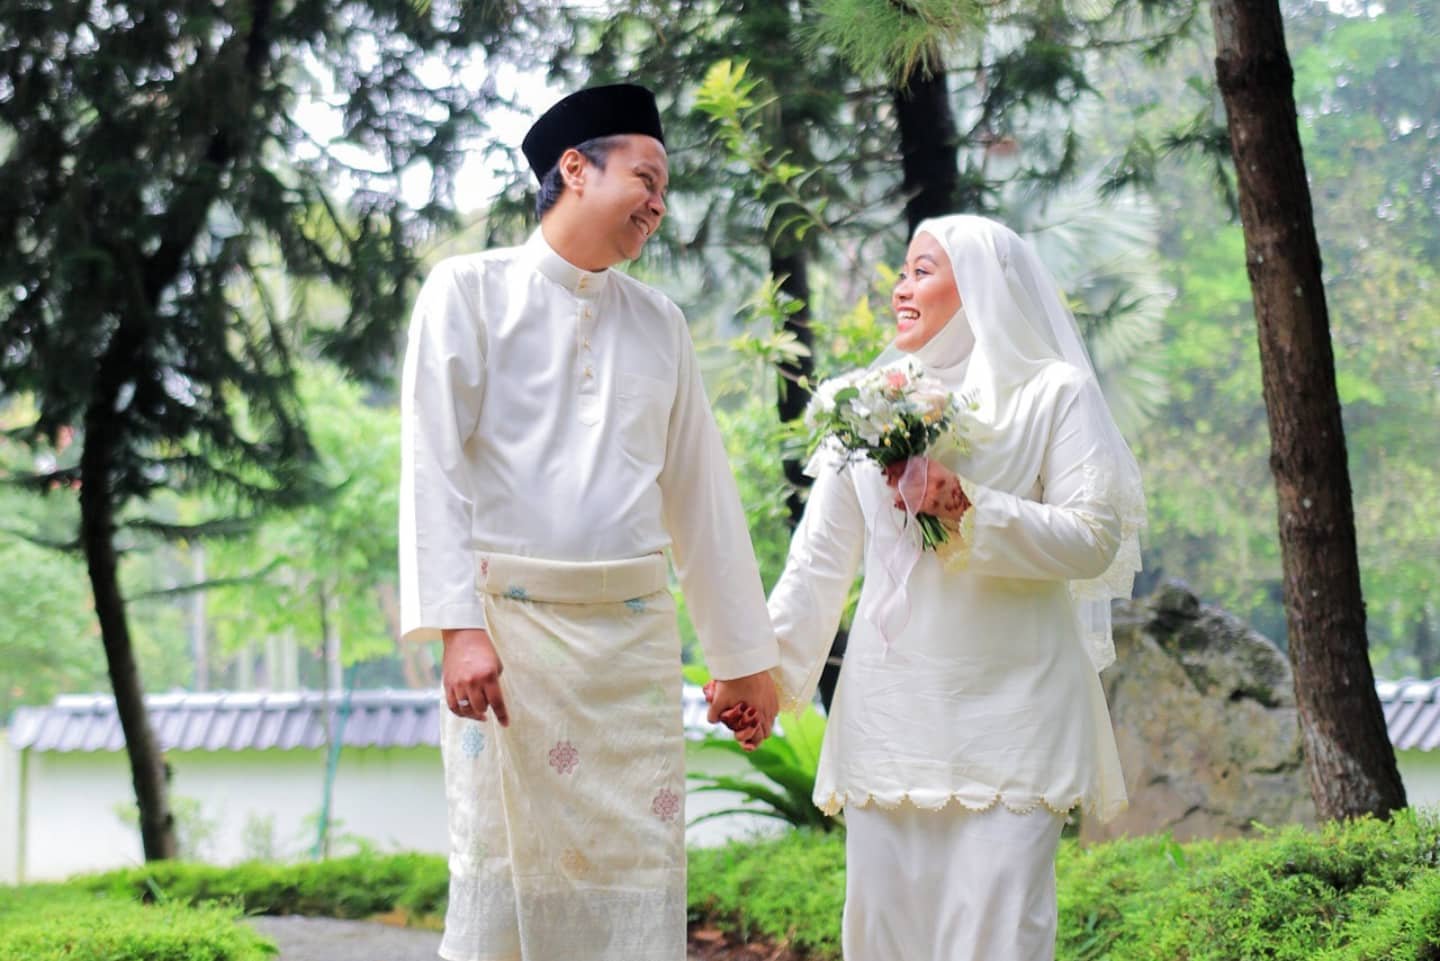 Malay-Muslim newlyweds Ili Aqilah and her husband Arif Jusoh were shocked to find out some Muslim couples are removing hijabs on camera for videos posted on social media platform TikTok. Photo: Handout